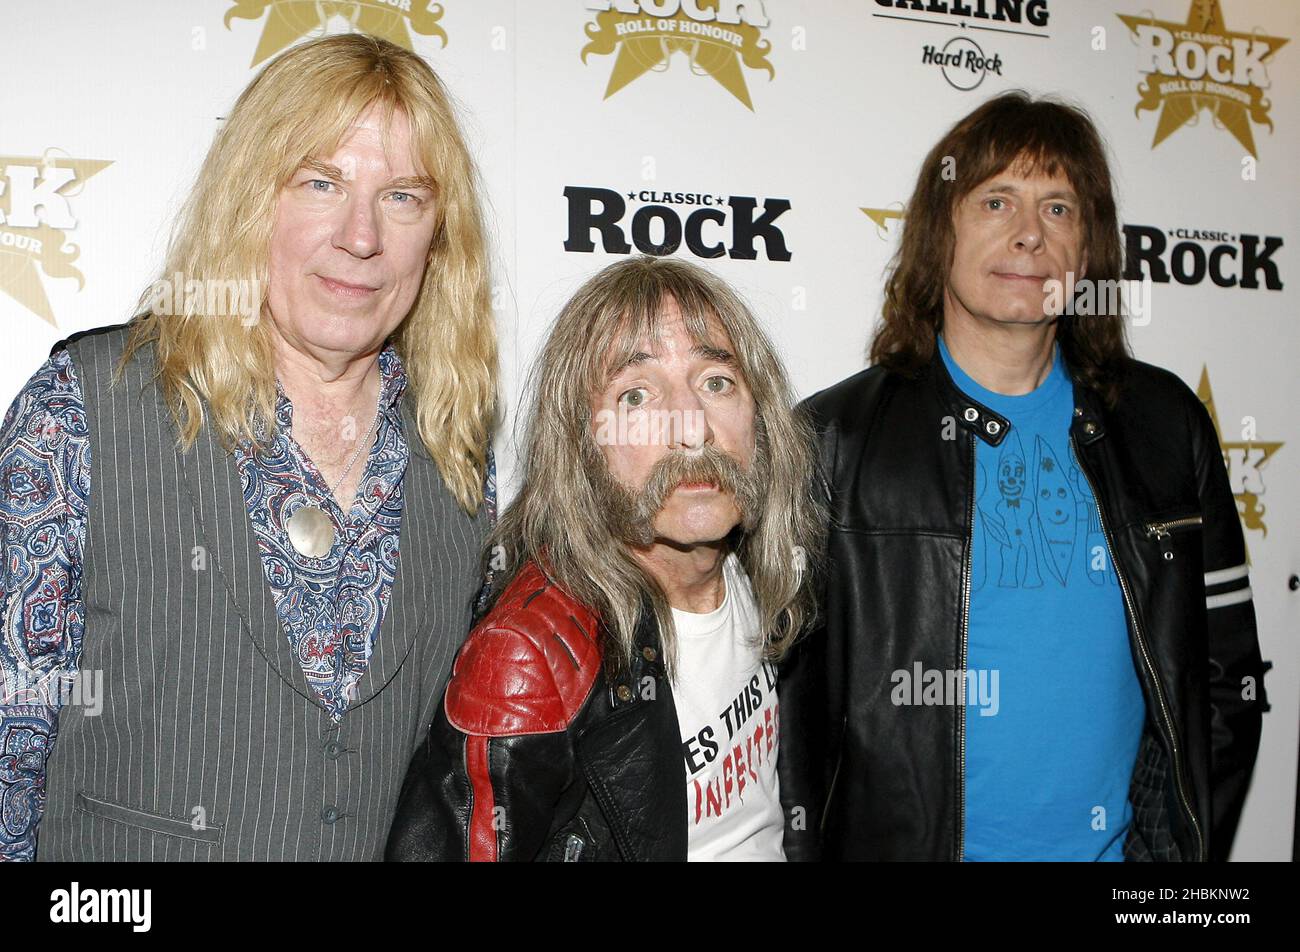 Spoof rock band Spinal tap, featuring, from left, David St. Hubbins (Michael McKean), Derek Smalls (Harry Shearer) and Nigel Tufnel (Christopher Guest) pose for pictures for the Classic Rock Roll of Honour Nominations launch at Hard Rock Cafe in Hyde Park, London Stock Photo